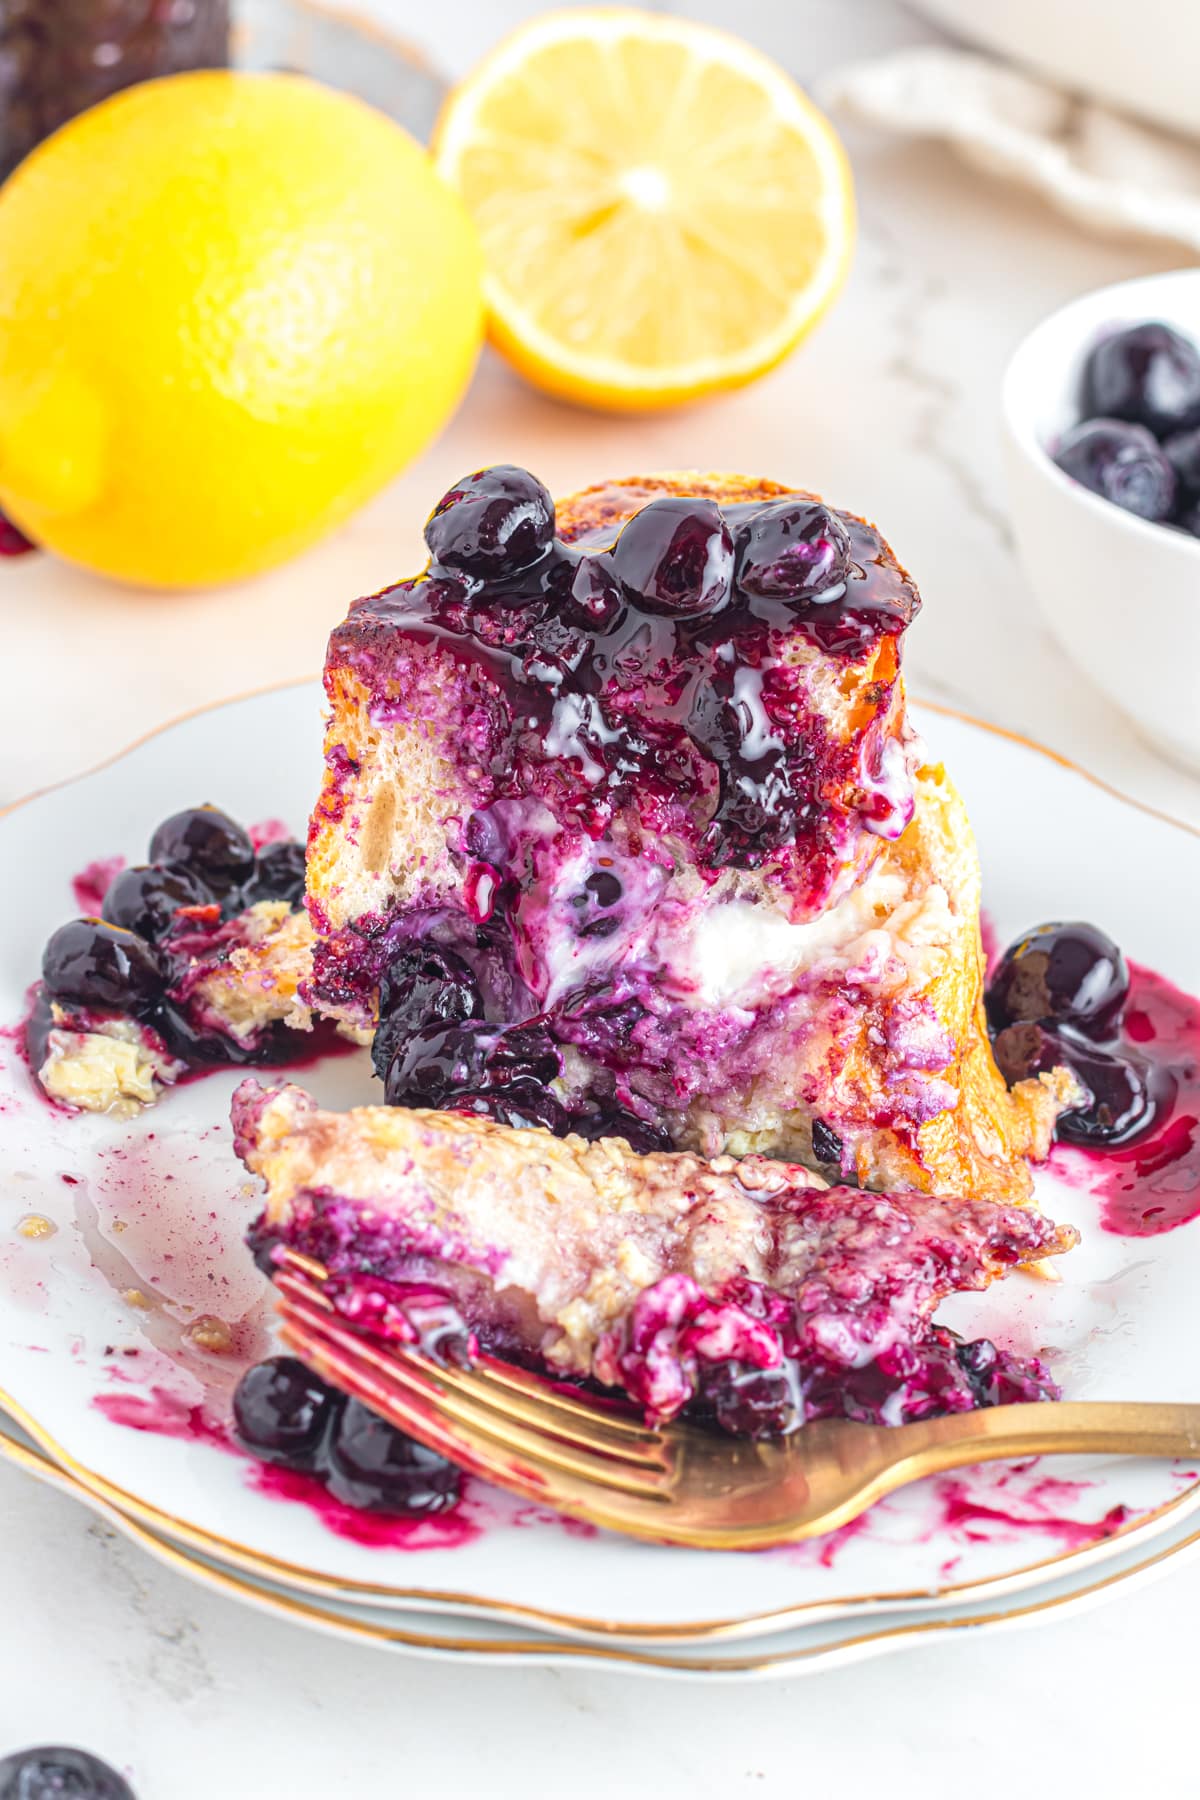 Sliced blueberry French toast revealing cream cheese filling.
